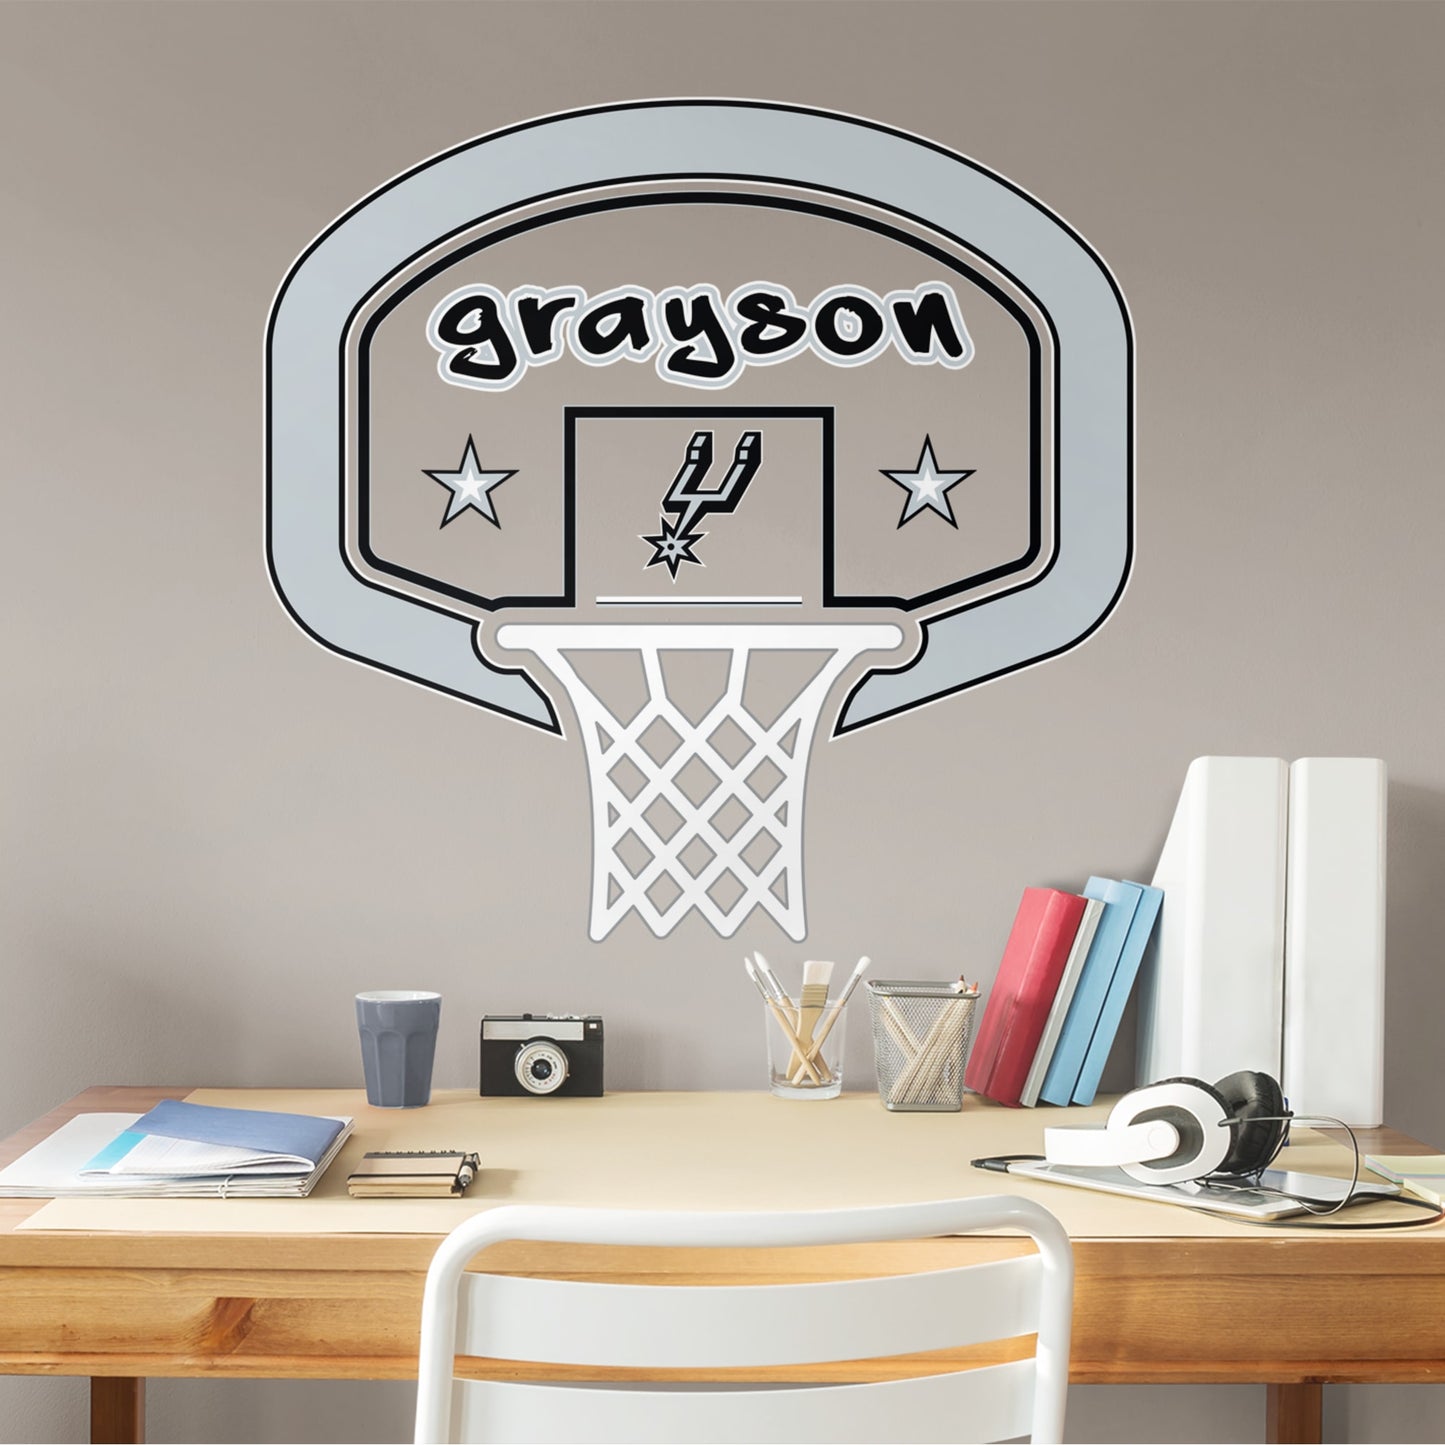 San Antonio Spurs: Personalized Name - Officially Licensed NBA Transfer Decal